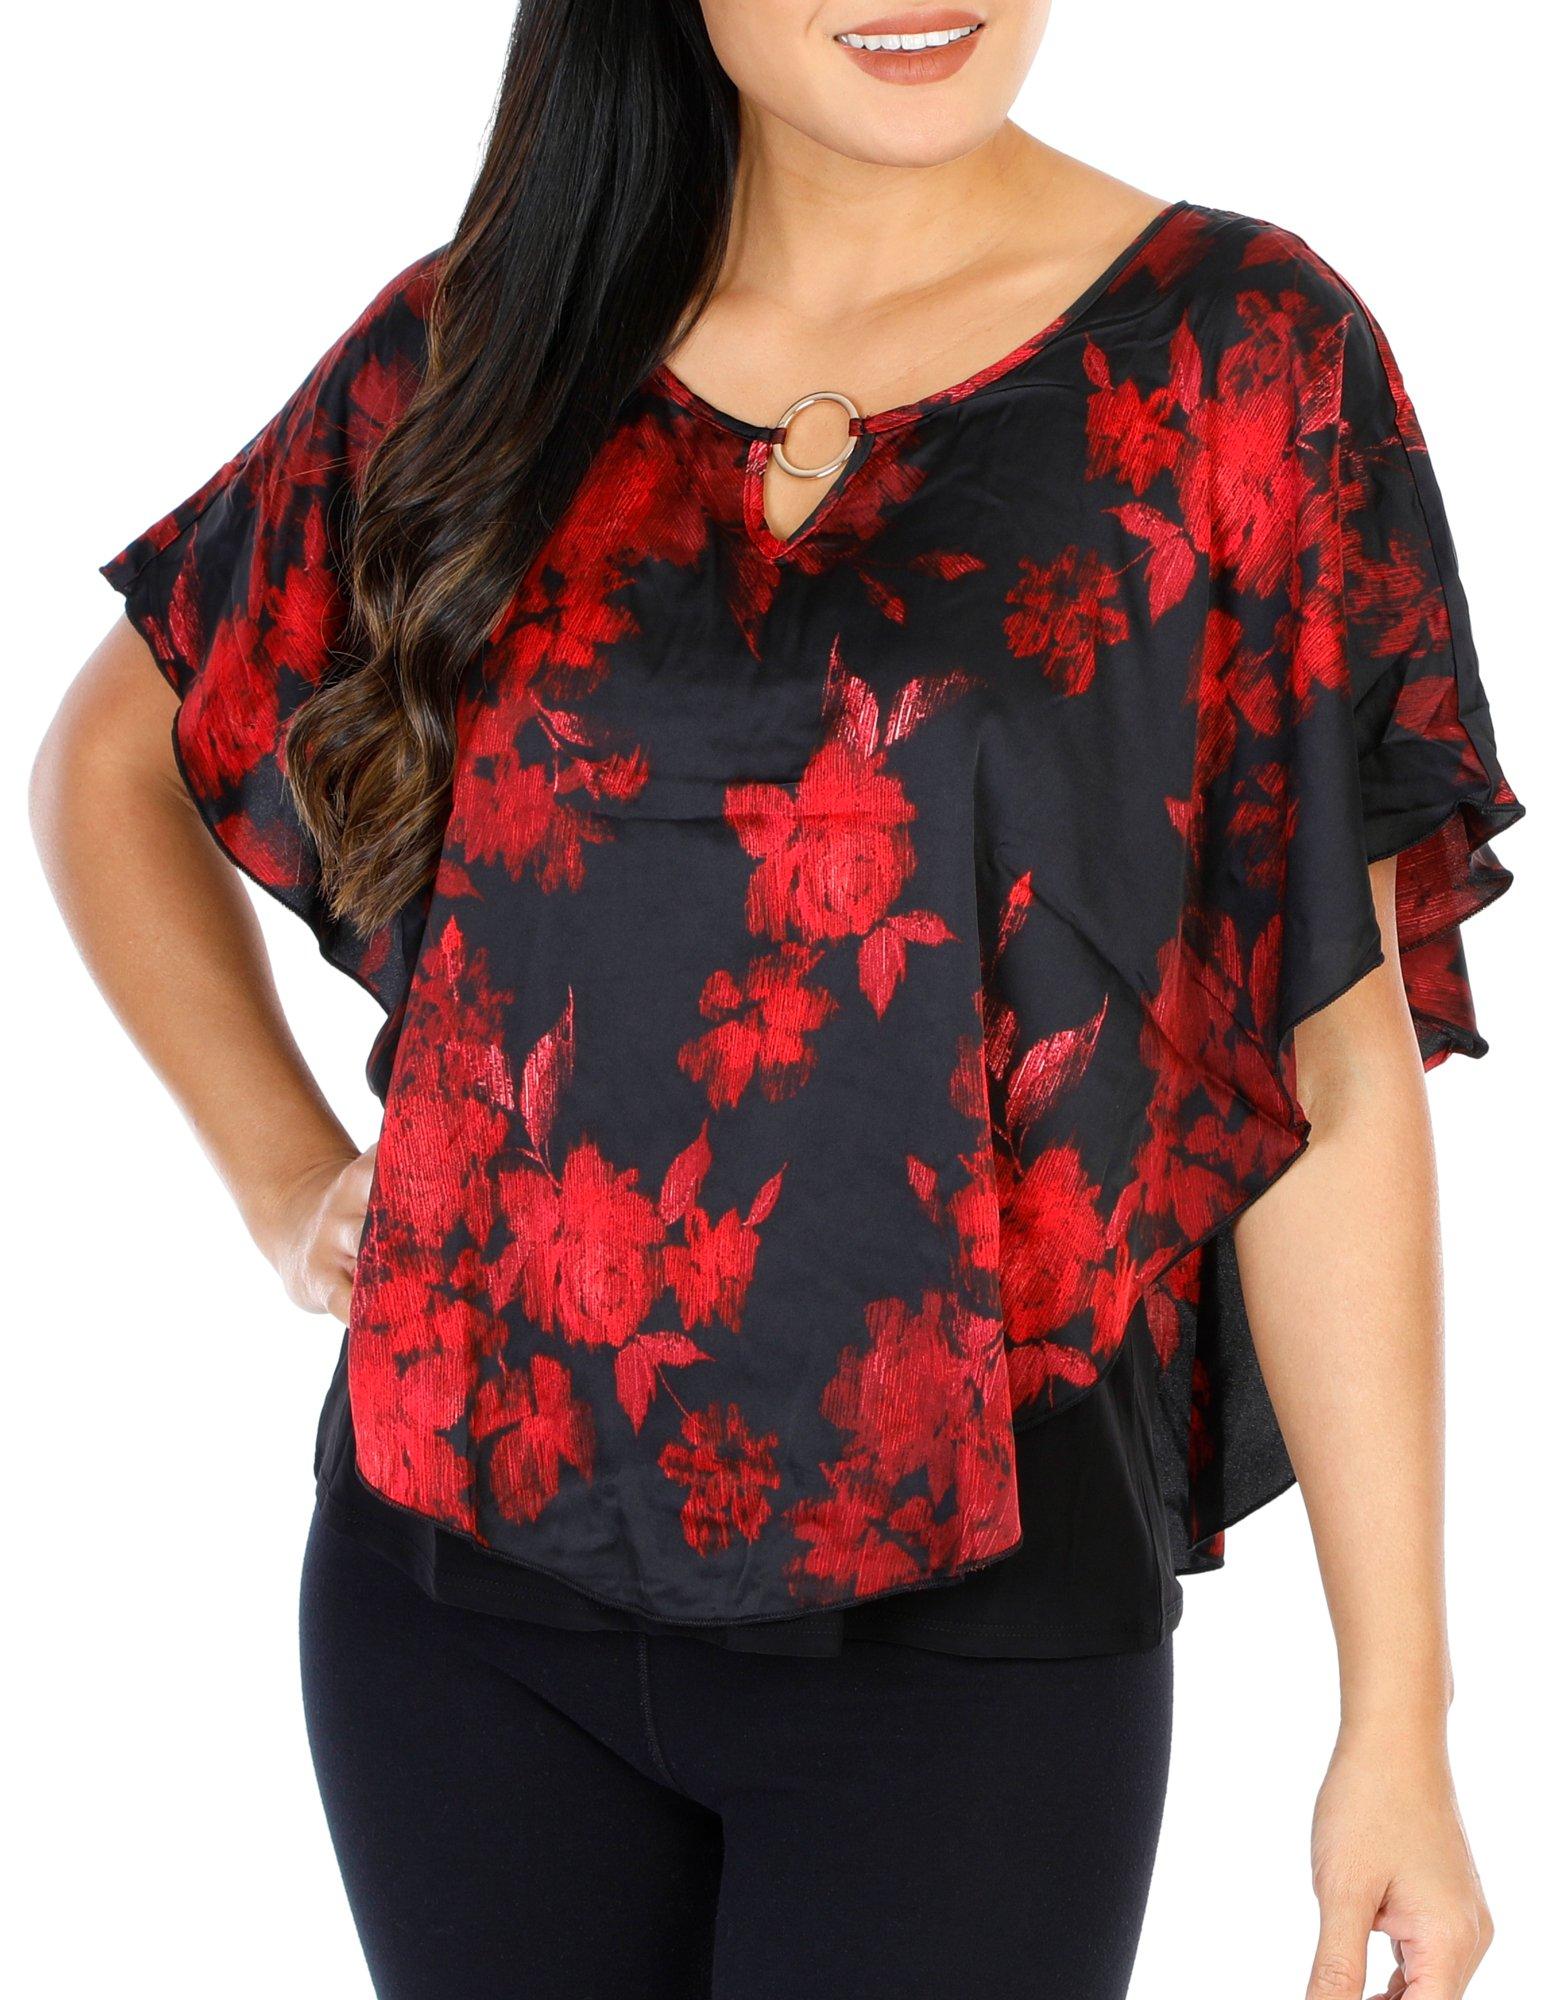 Generic Plus Size Tops Clearance Womens Tops Lightening Deals Outlets Store  Clearance Overstock Outlets Store Clearance Today Limited Deals Daily Deals  of the Day Prime Today Only - ShopStyle